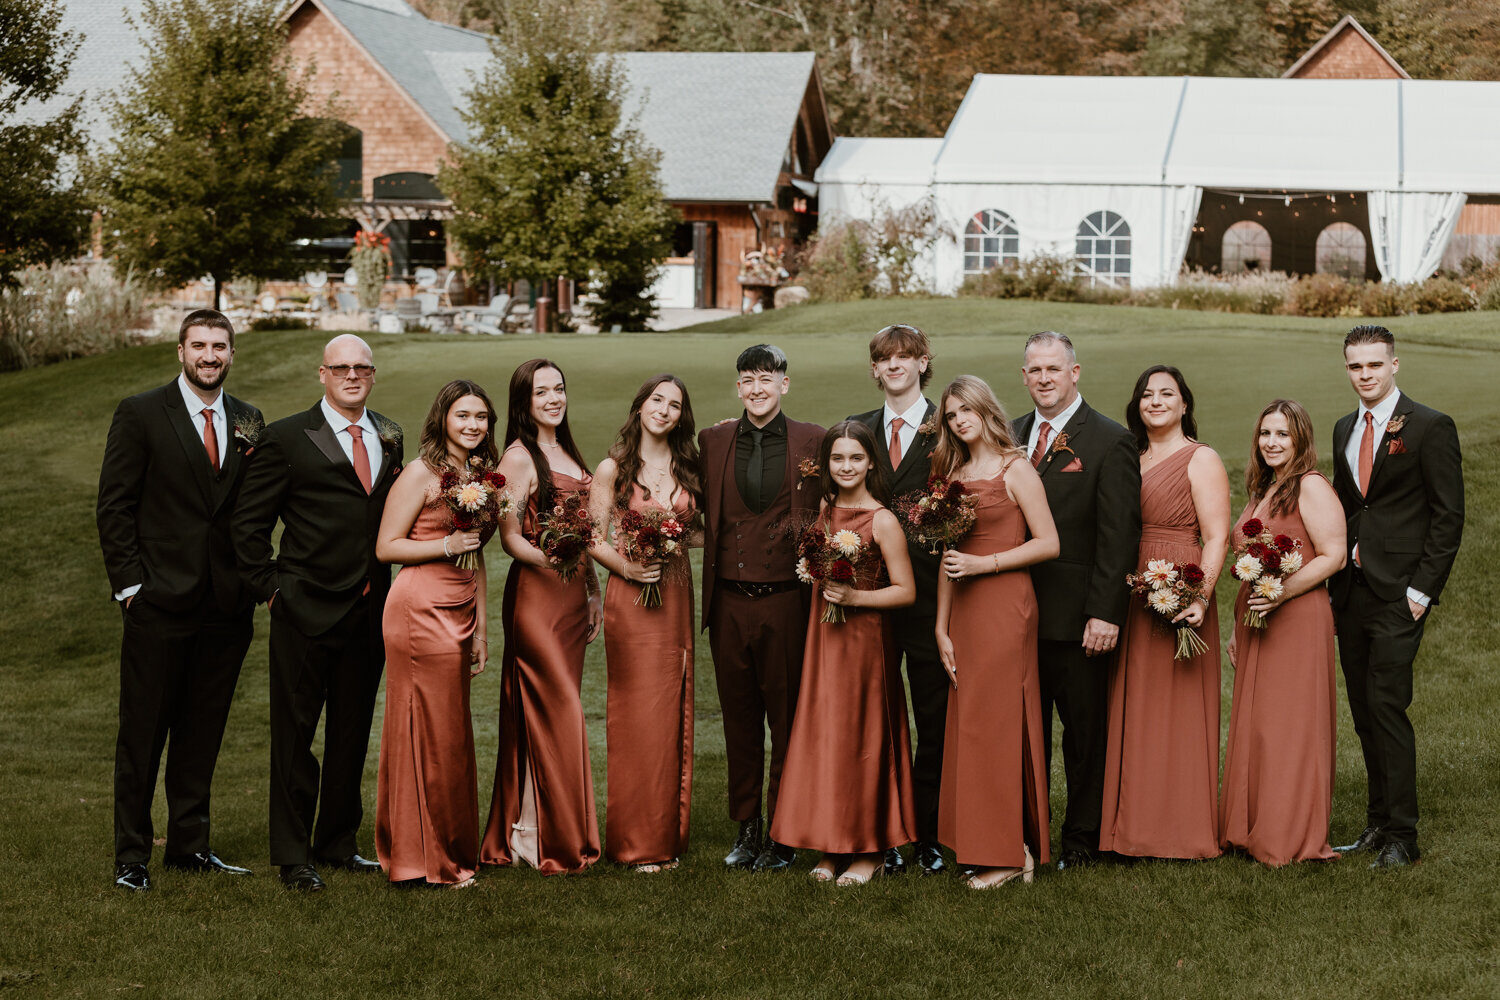 A group portrait of well-dressed individuals at a wedding. They are standing on a lush lawn with The Venue at Winding Hills, featuring a charming barn and white marquee tent, in the background.